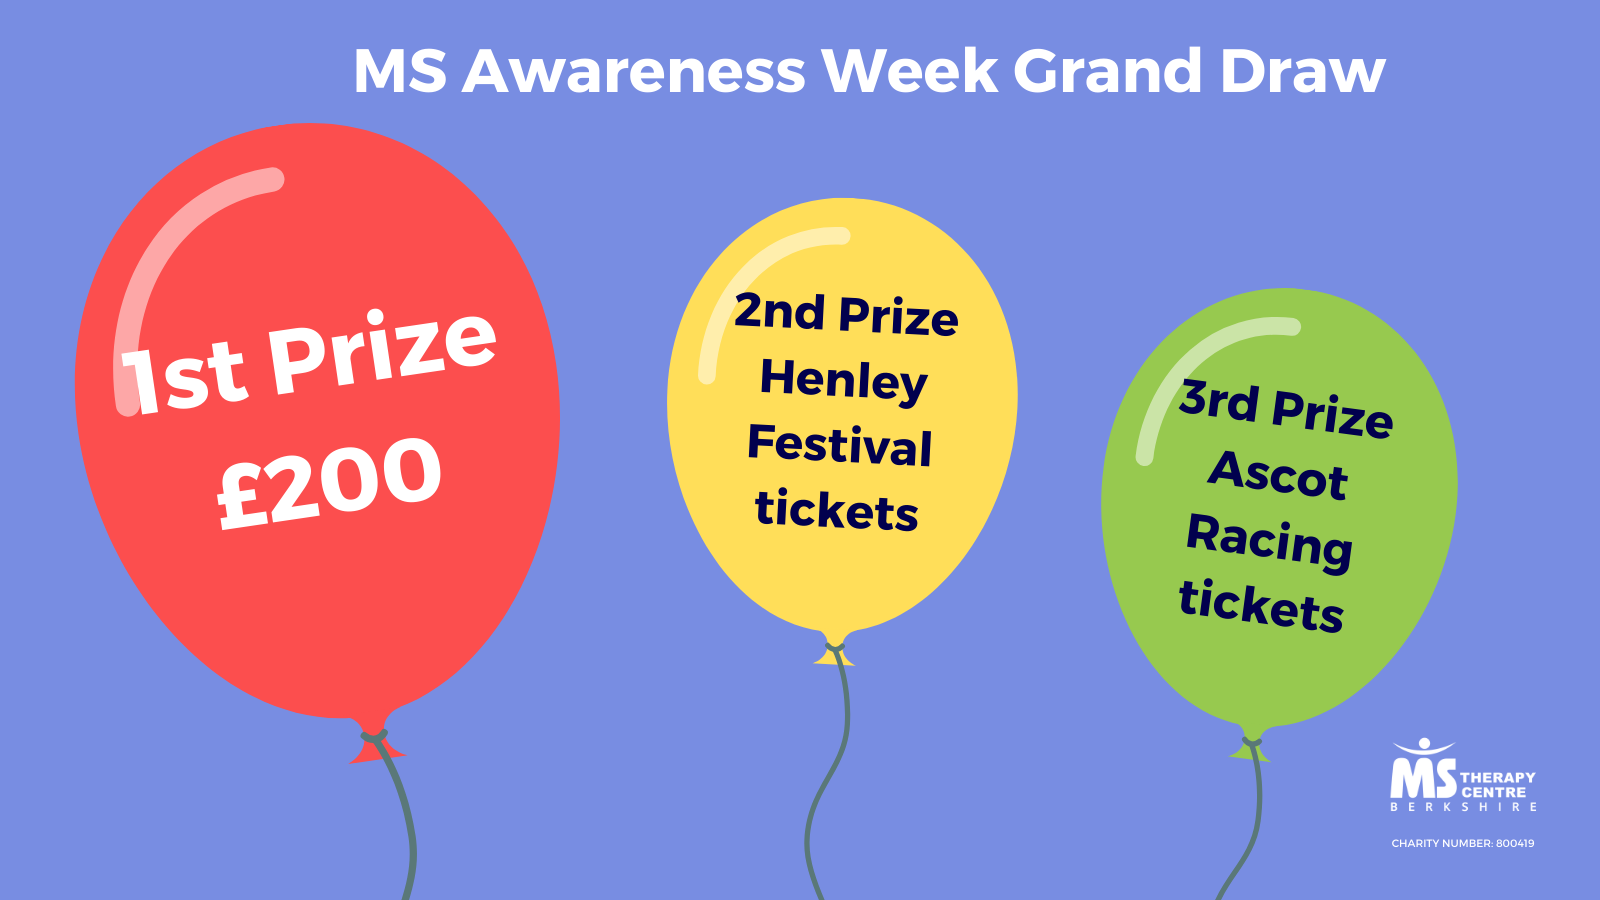 Last chance to buy your MS Awareness Week Grand Draw tickets!